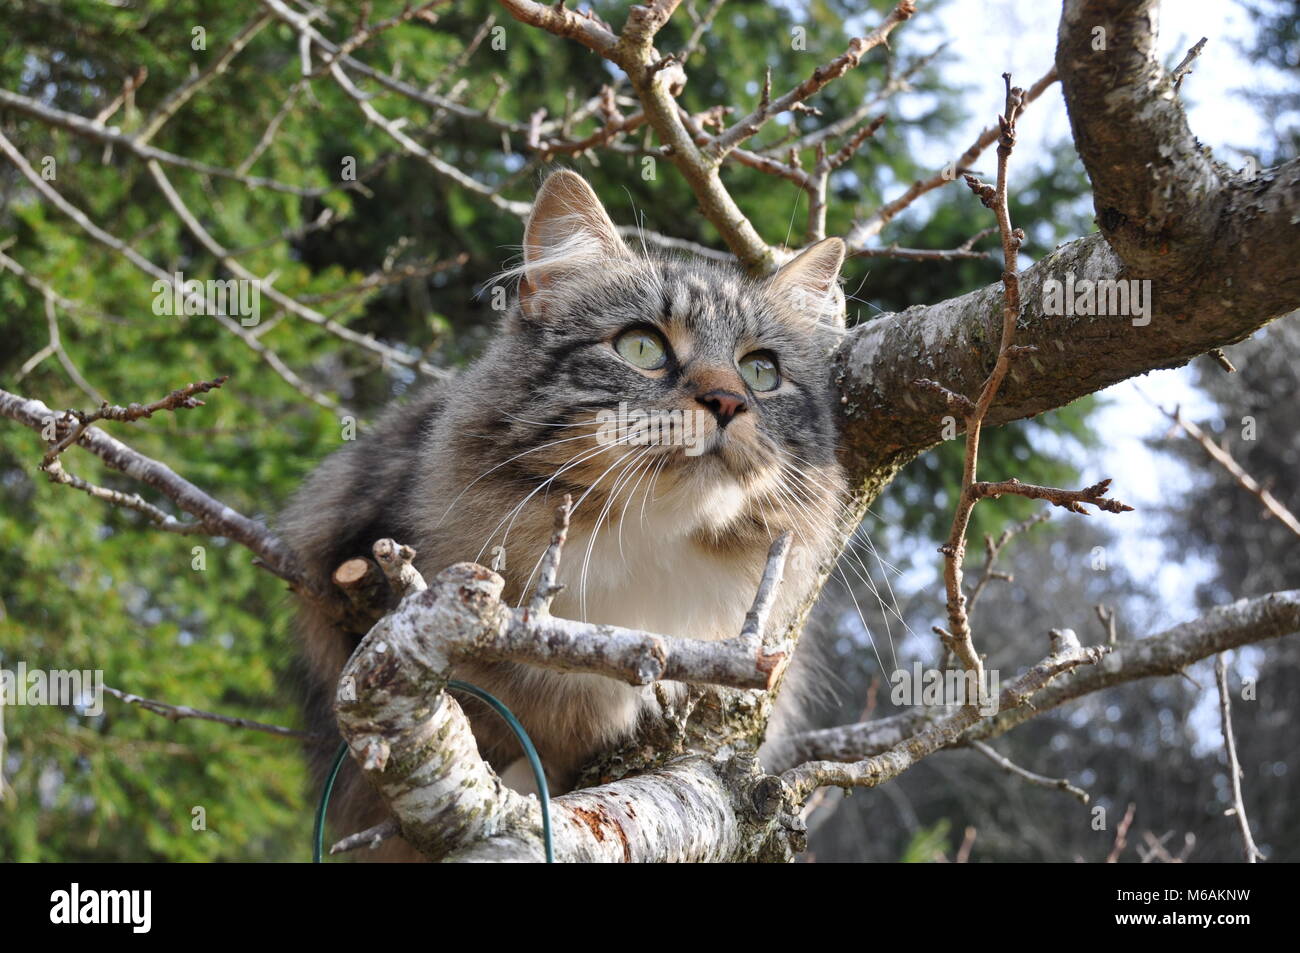 Norwegian forest cat sitting in a tree Stock Photo